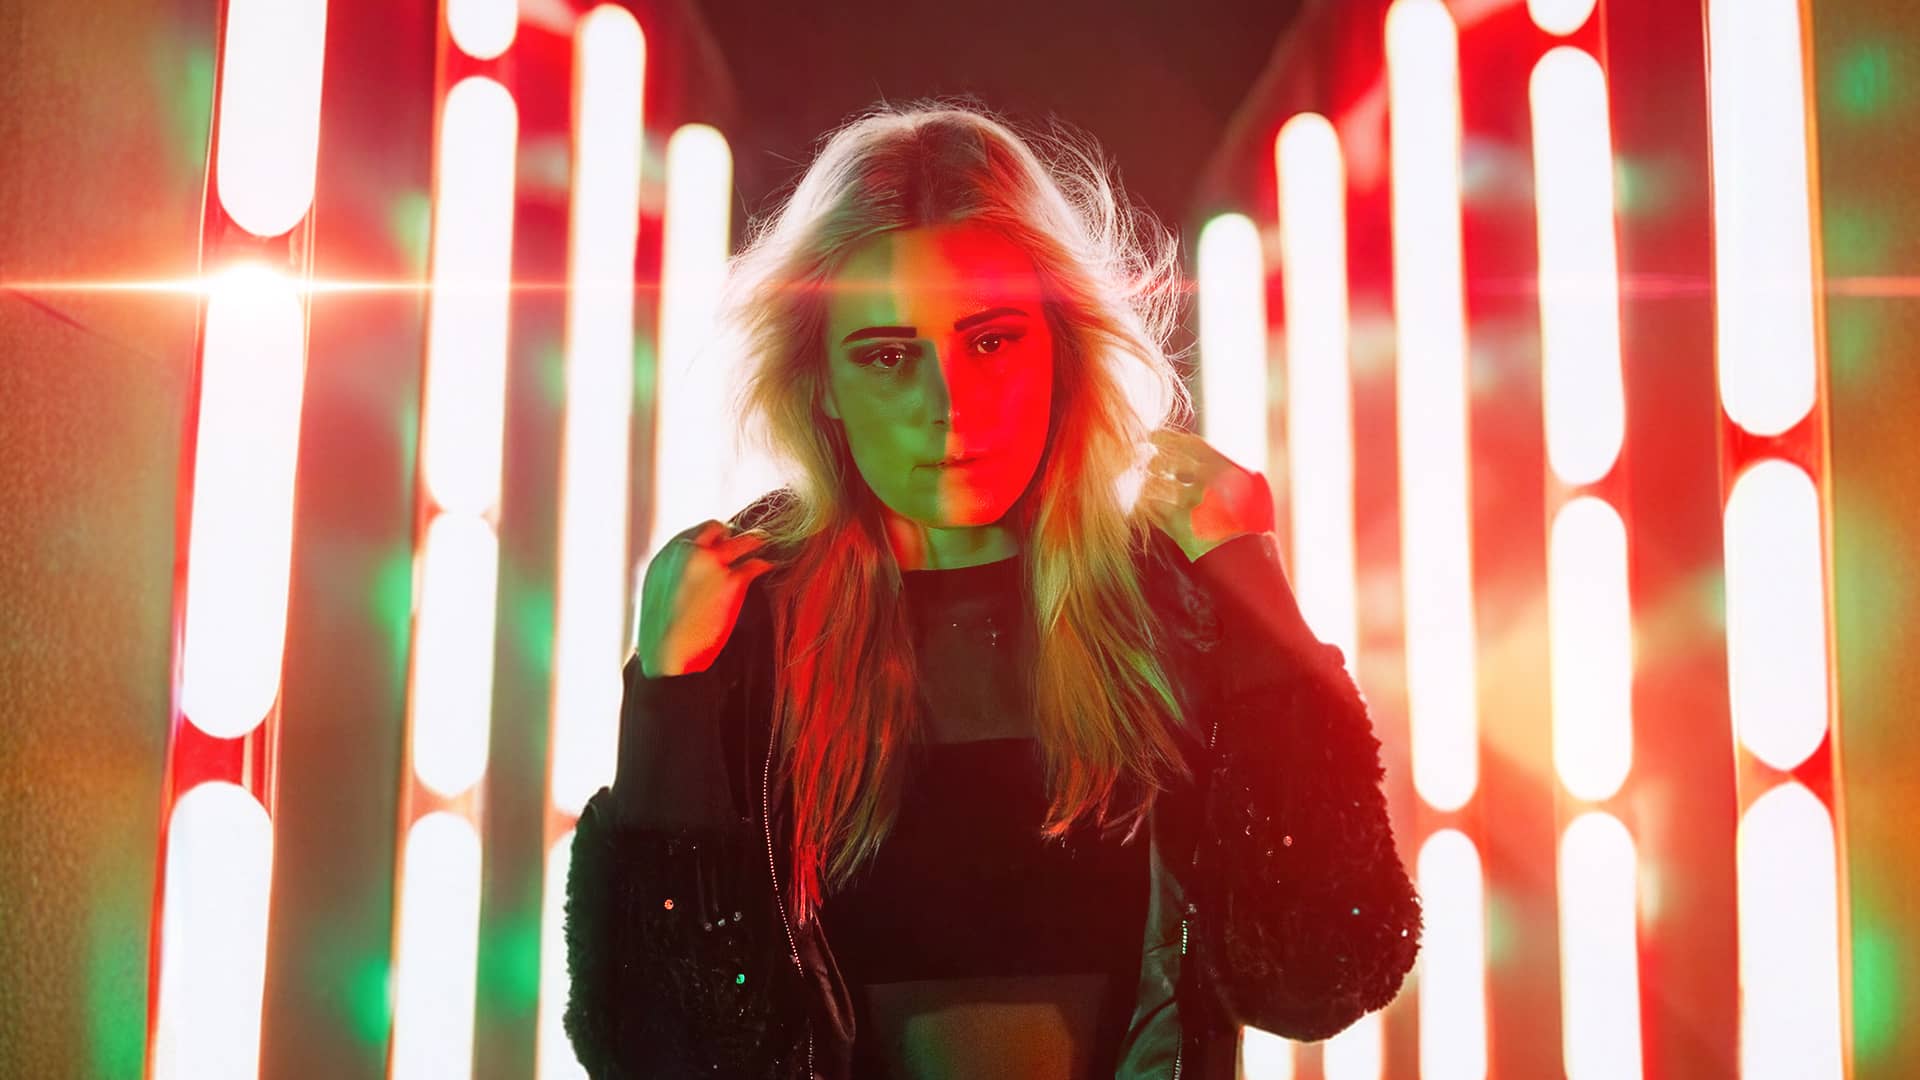 DJ Oskana stands amid vibrant neon lights, embodying the lively spirit of her song 'Extasy'.